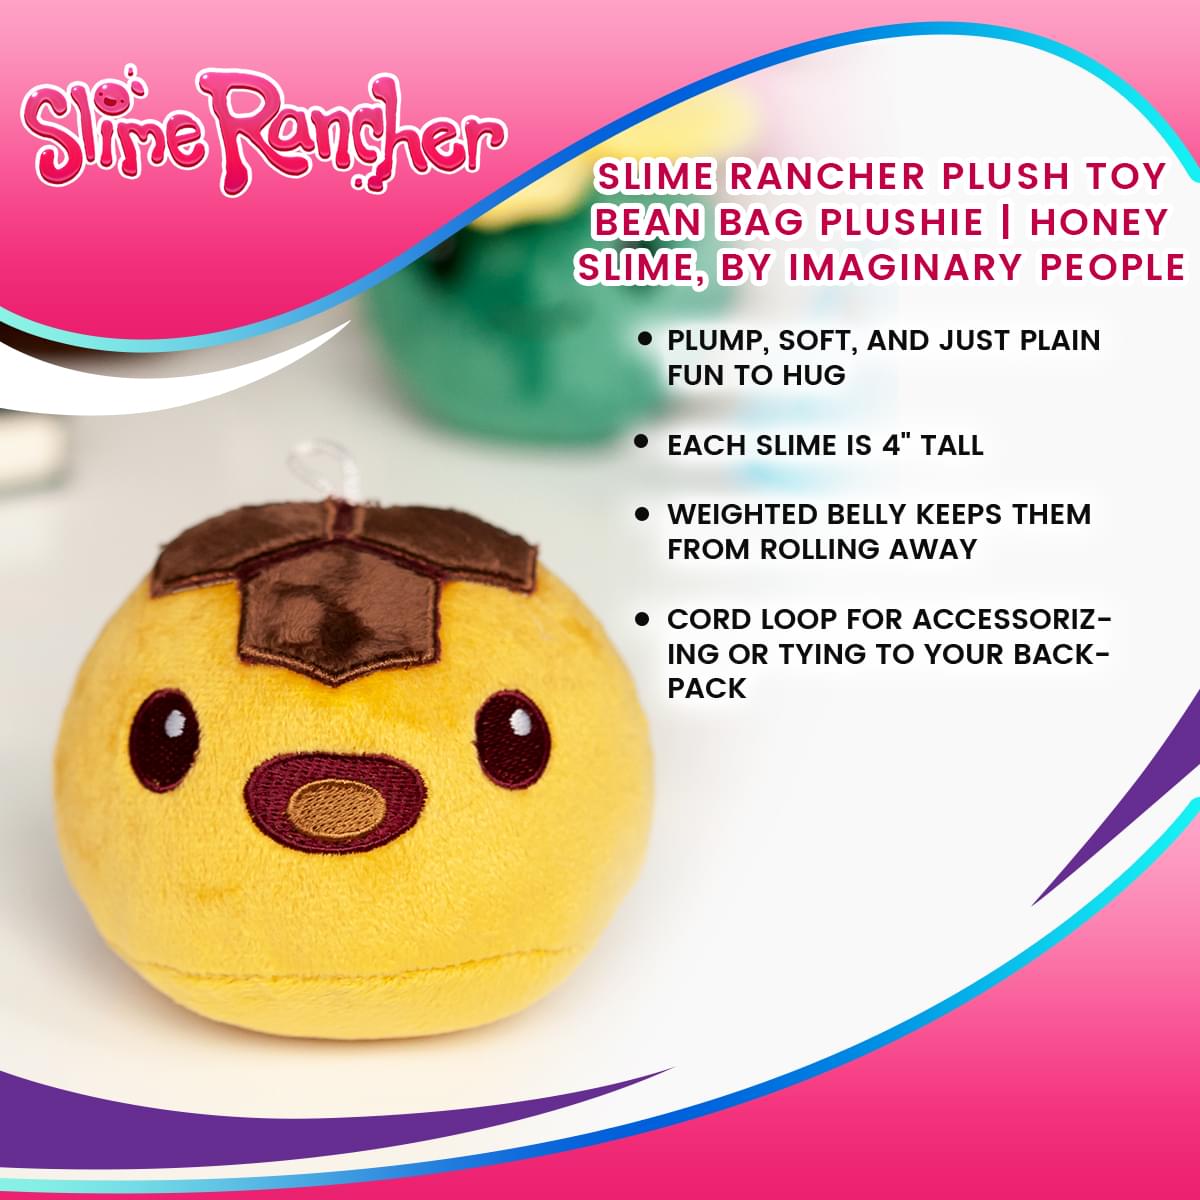 Slime Rancher Plush Toy Bean Bag Plushie | Honey Slime, by Imaginary People